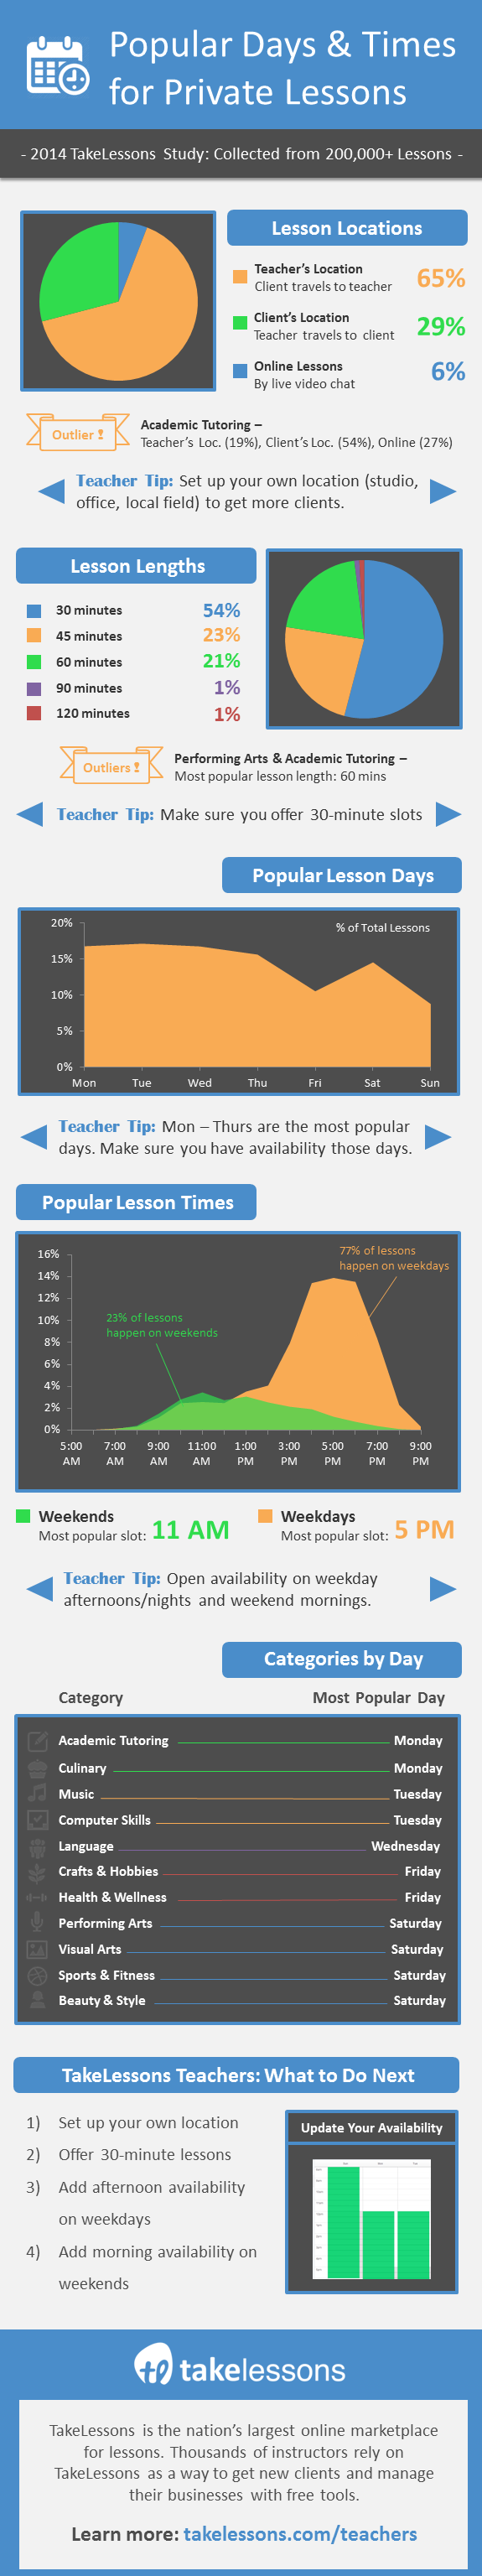 takelessons_image_popular-days-and-times-for-private-lessons1.png